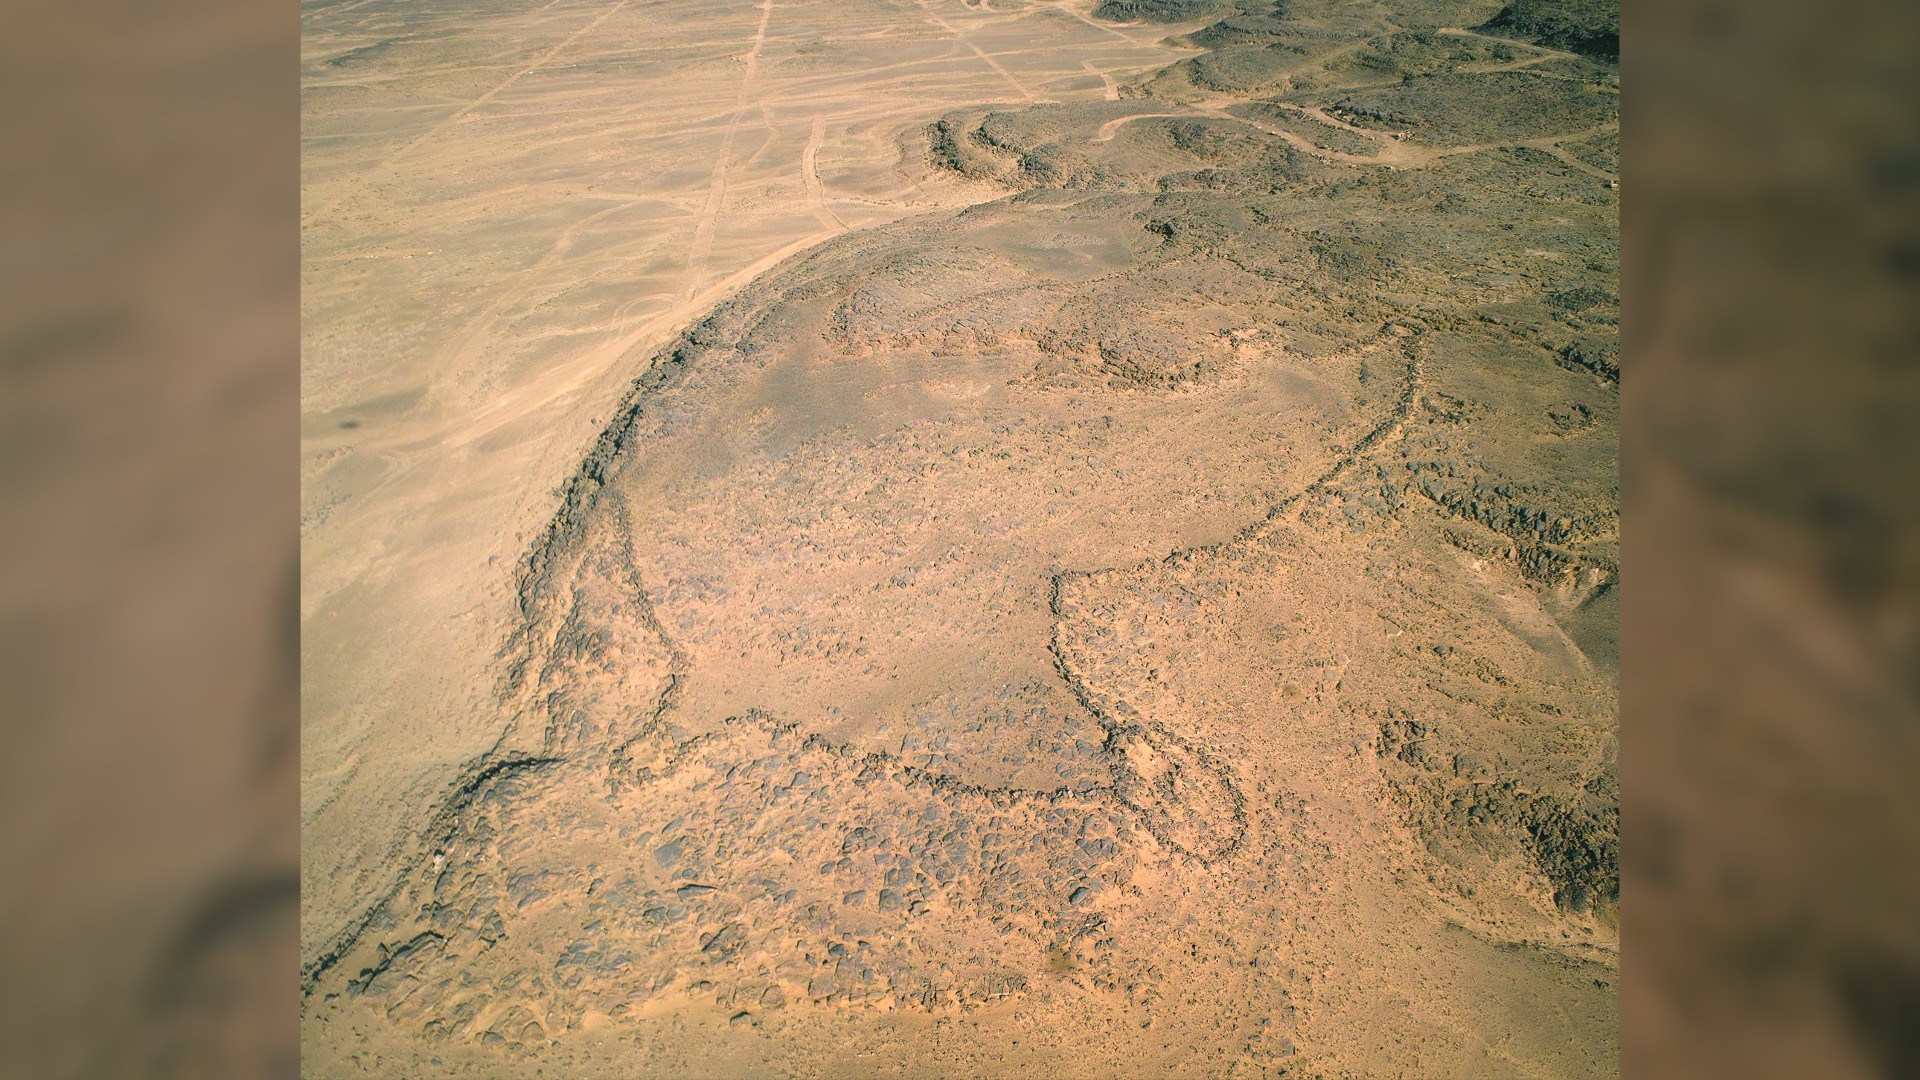 An aerial view of a desert kite. We see a large stone outline with a roundish shape in the desert.